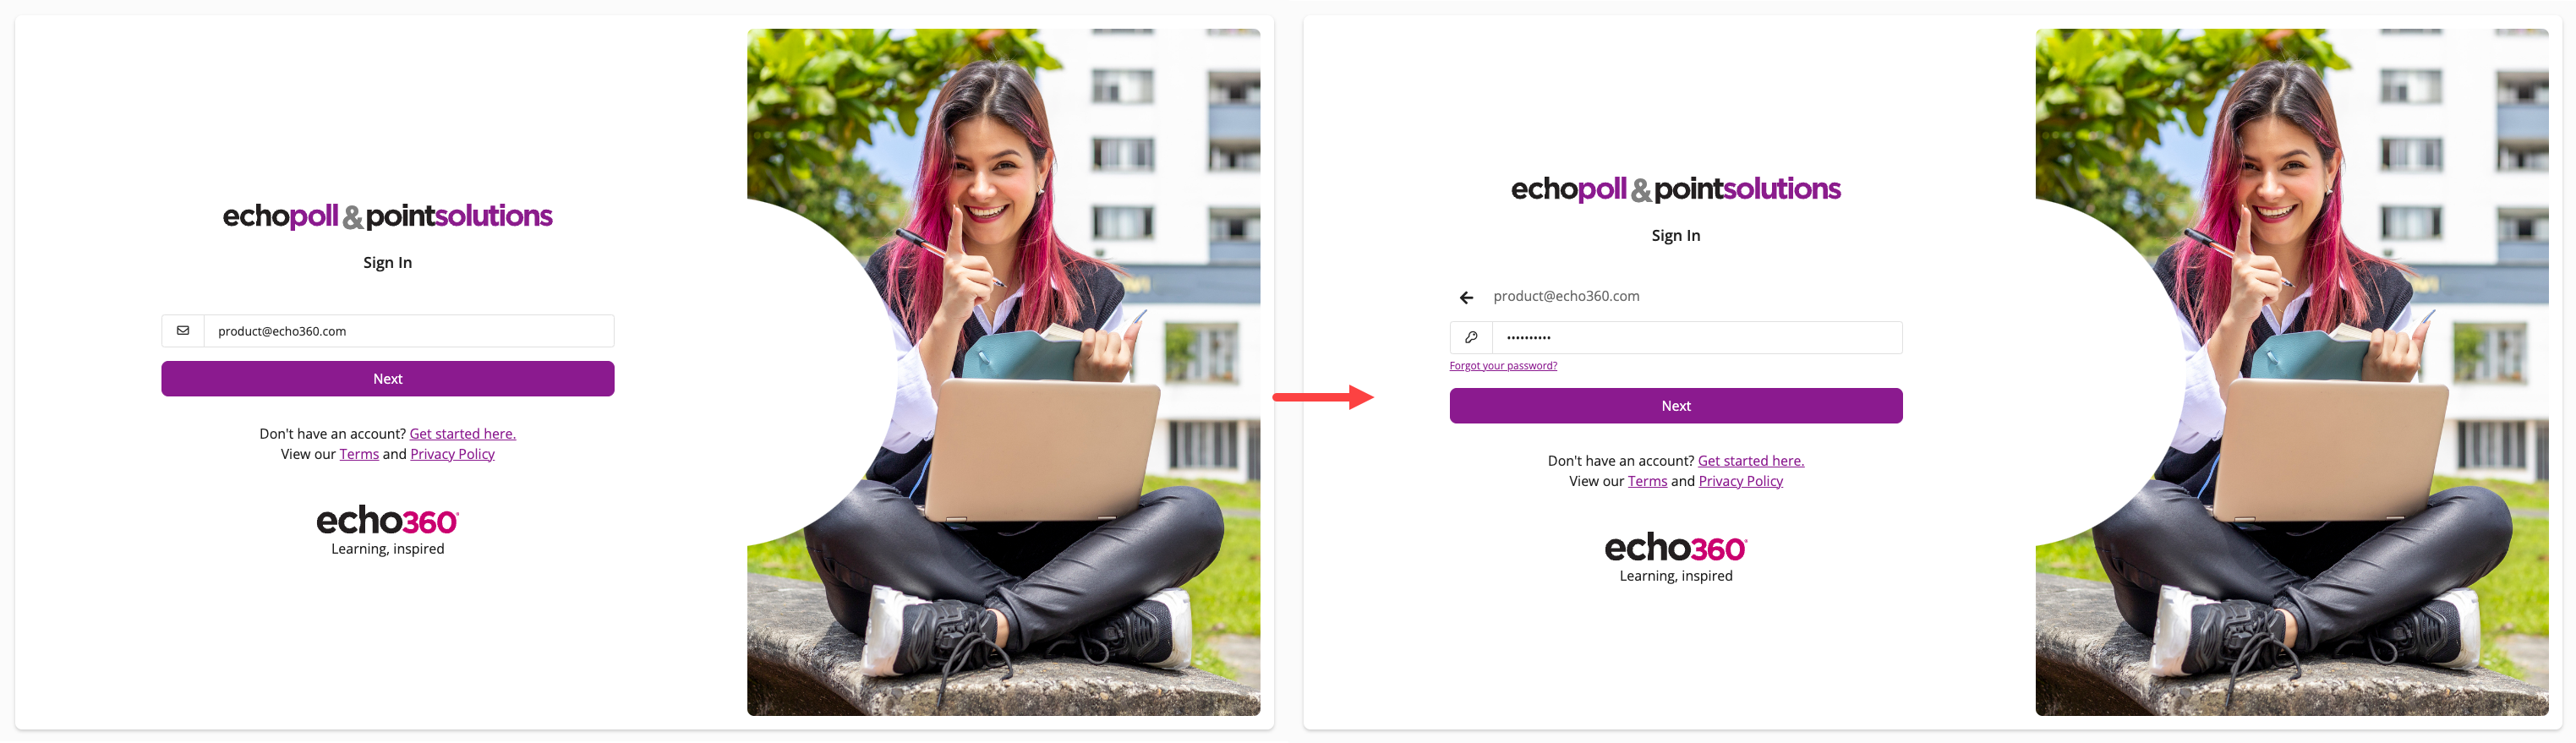 EchoPoll Signin screen showing field for email address and password as identifed